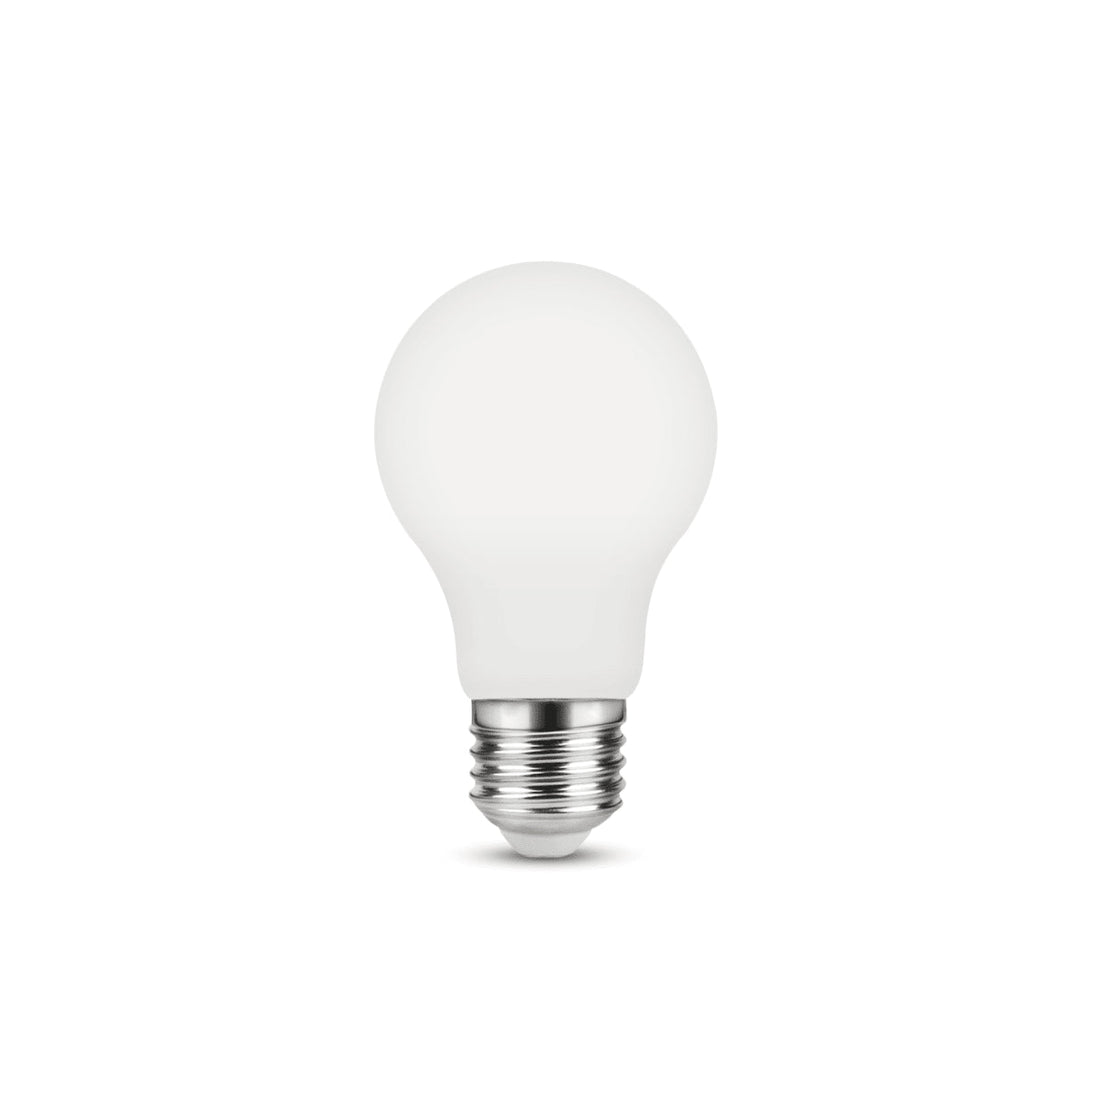 LED BULB E27=60W FROSTED DROP NATURAL LIGHT - best price from Maltashopper.com BR420007801